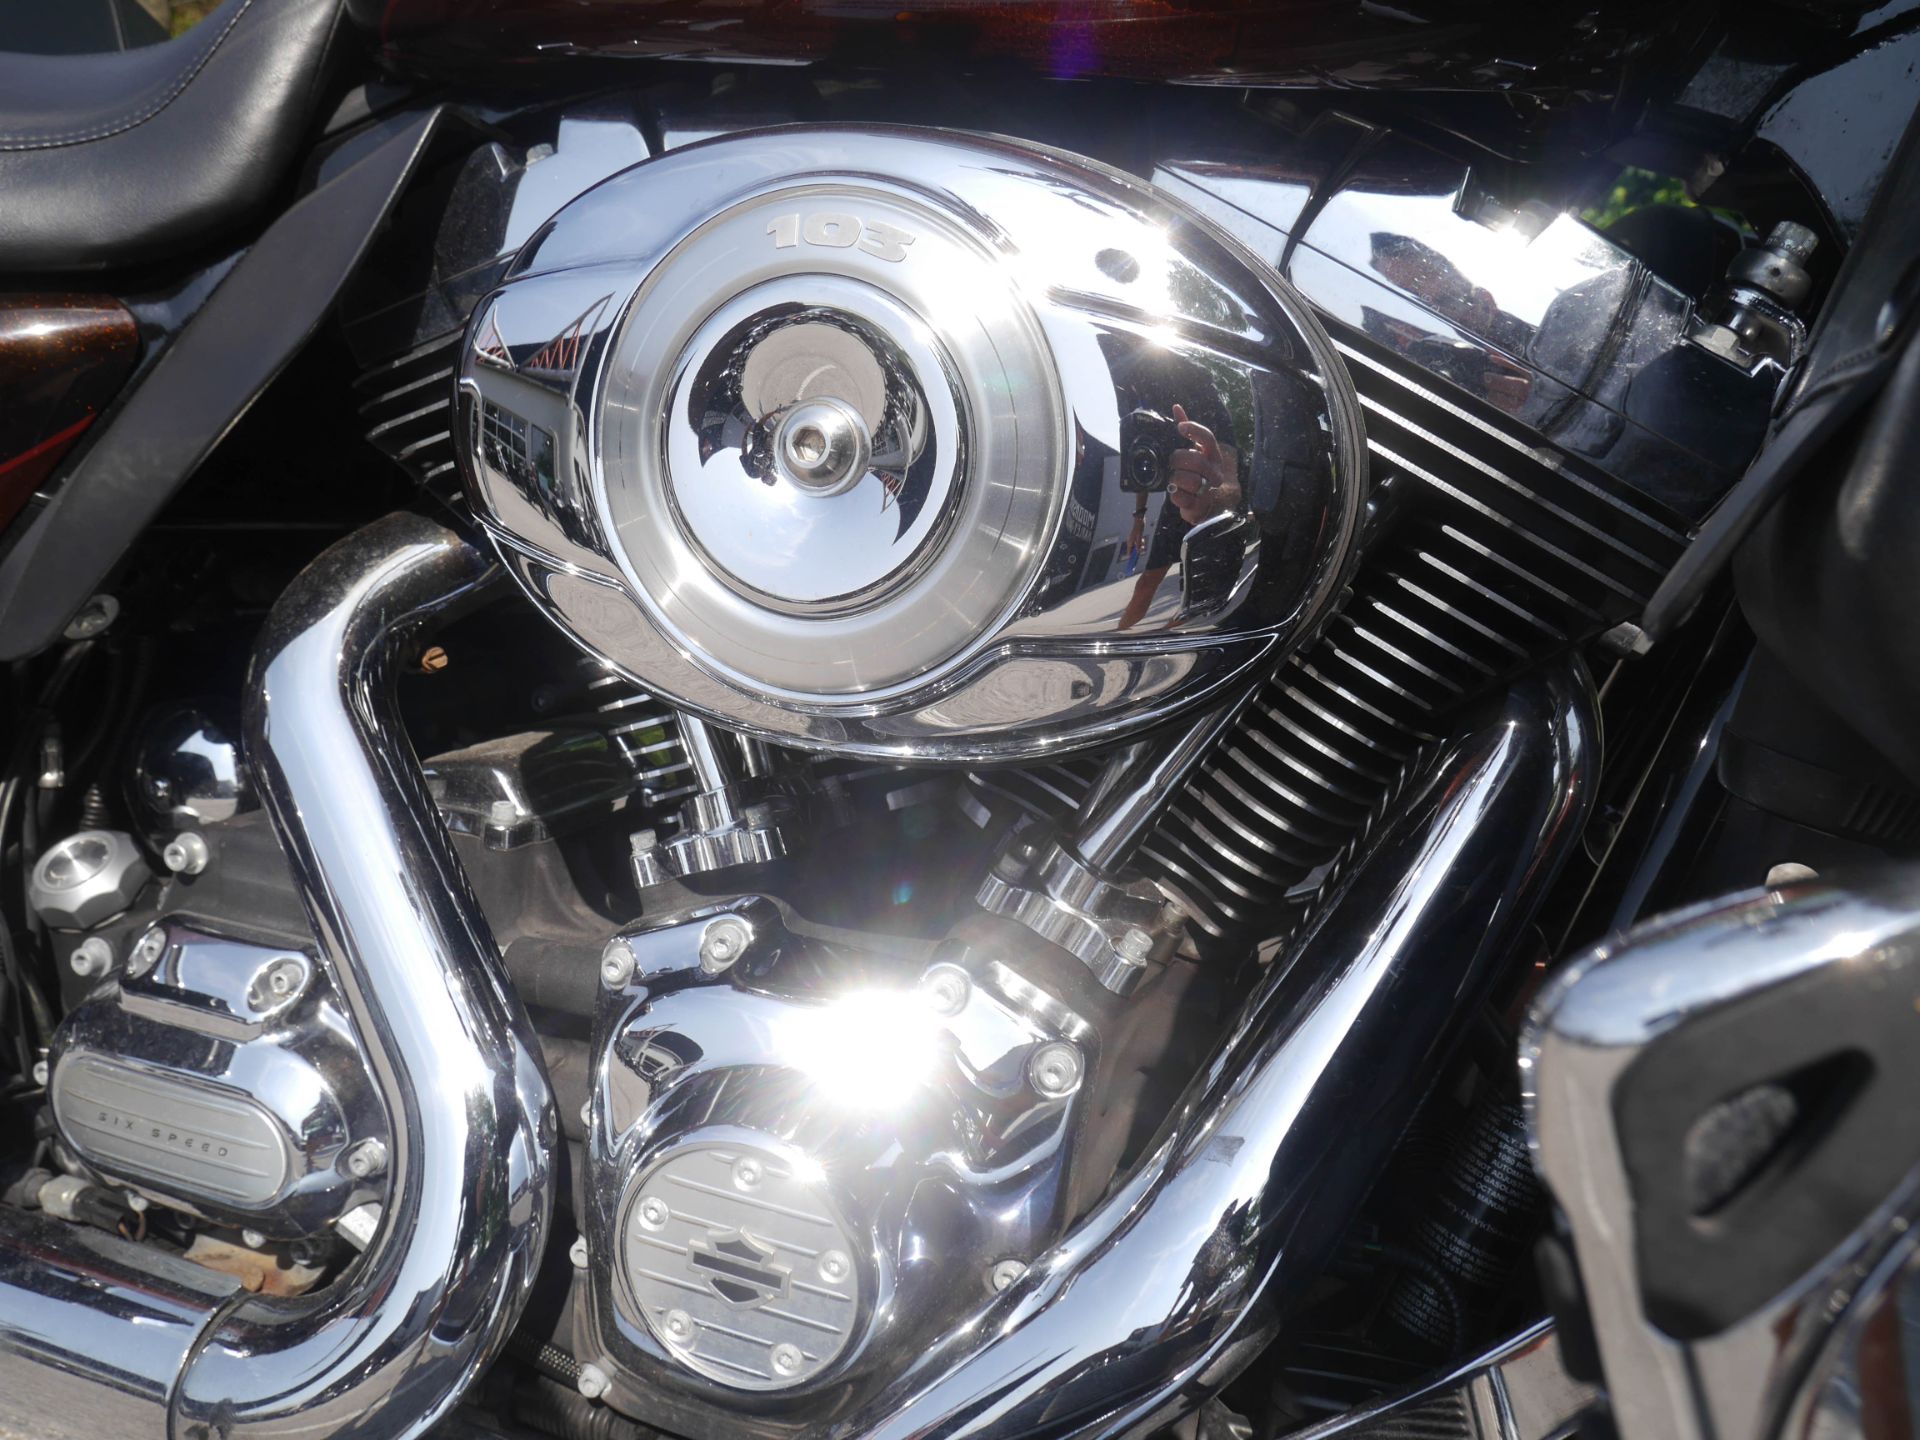 2011 Harley-Davidson Electra Glide® Ultra Limited in Franklin, Tennessee - Photo 2